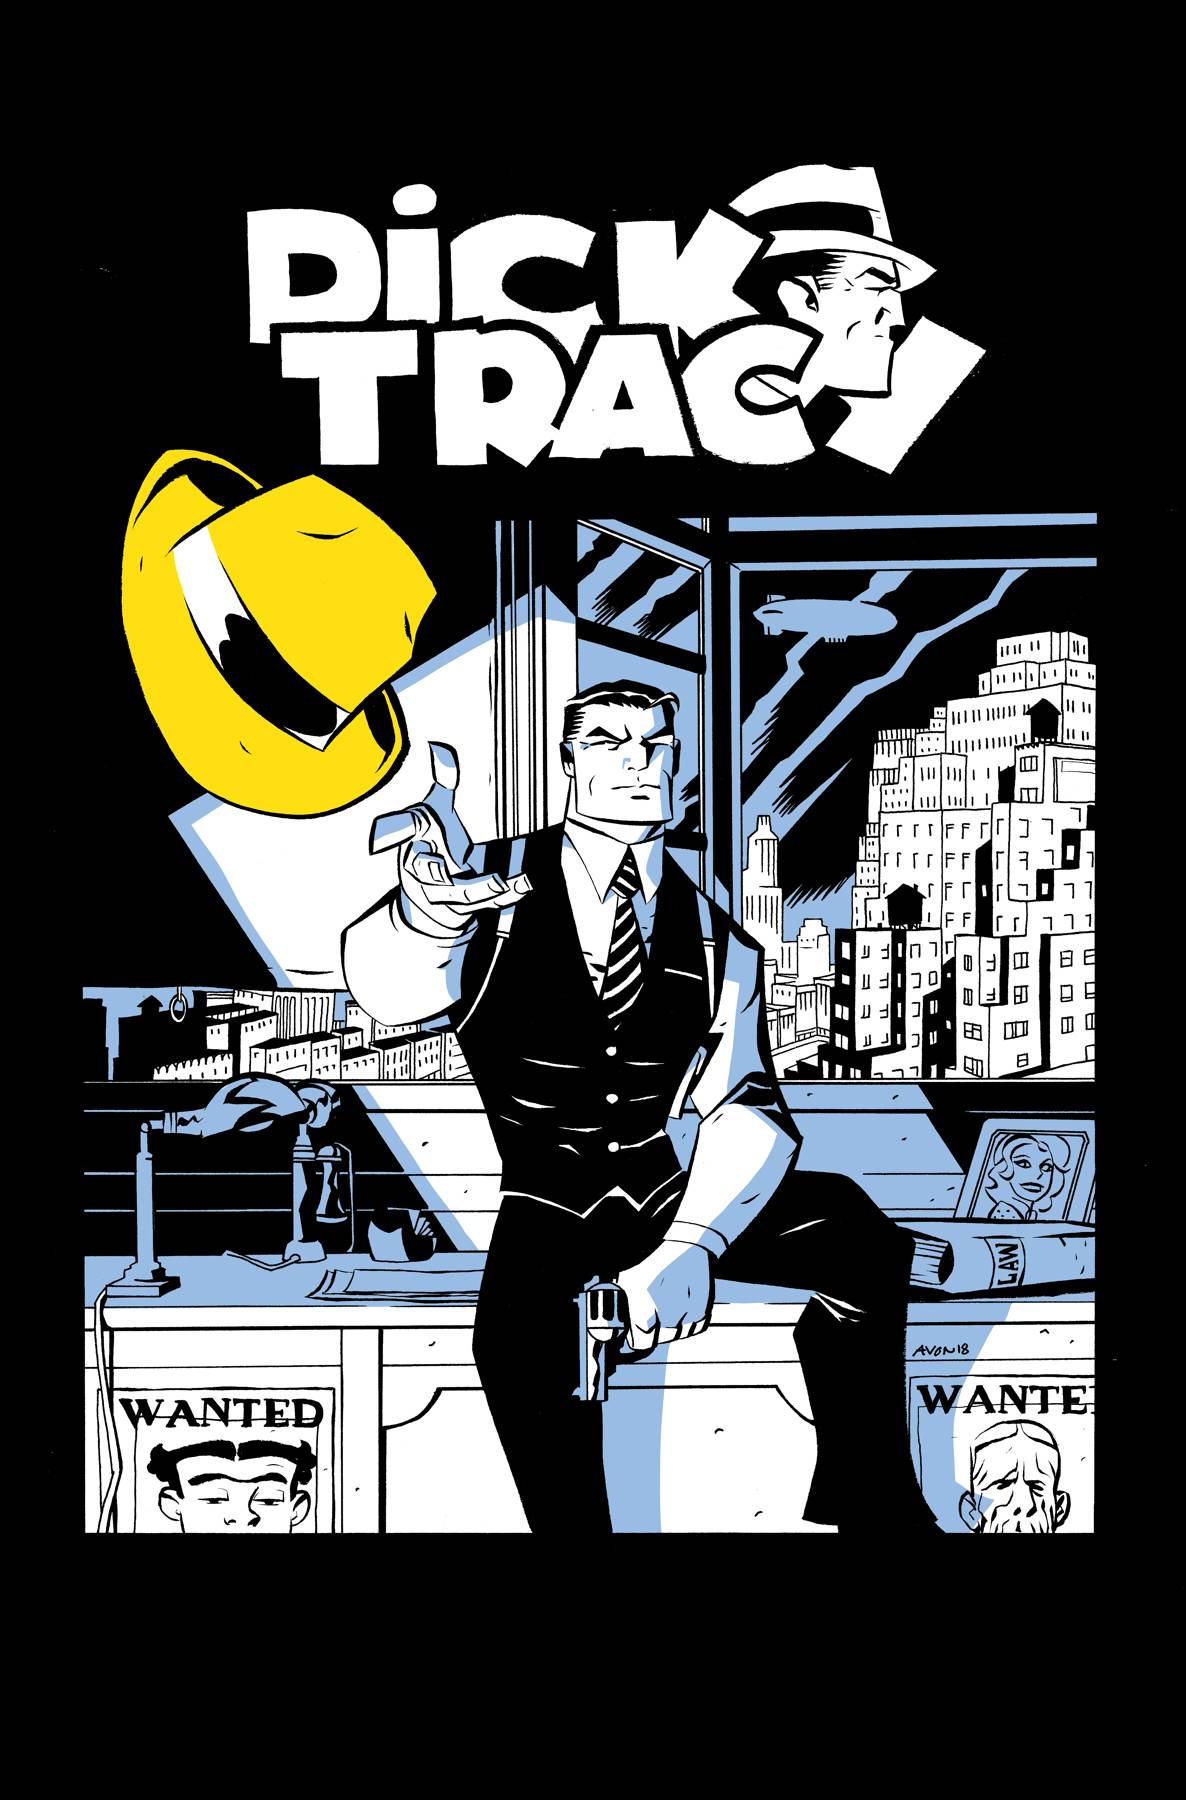 Dick Tracy Forever #1 1 for 10 Incentive Oeming